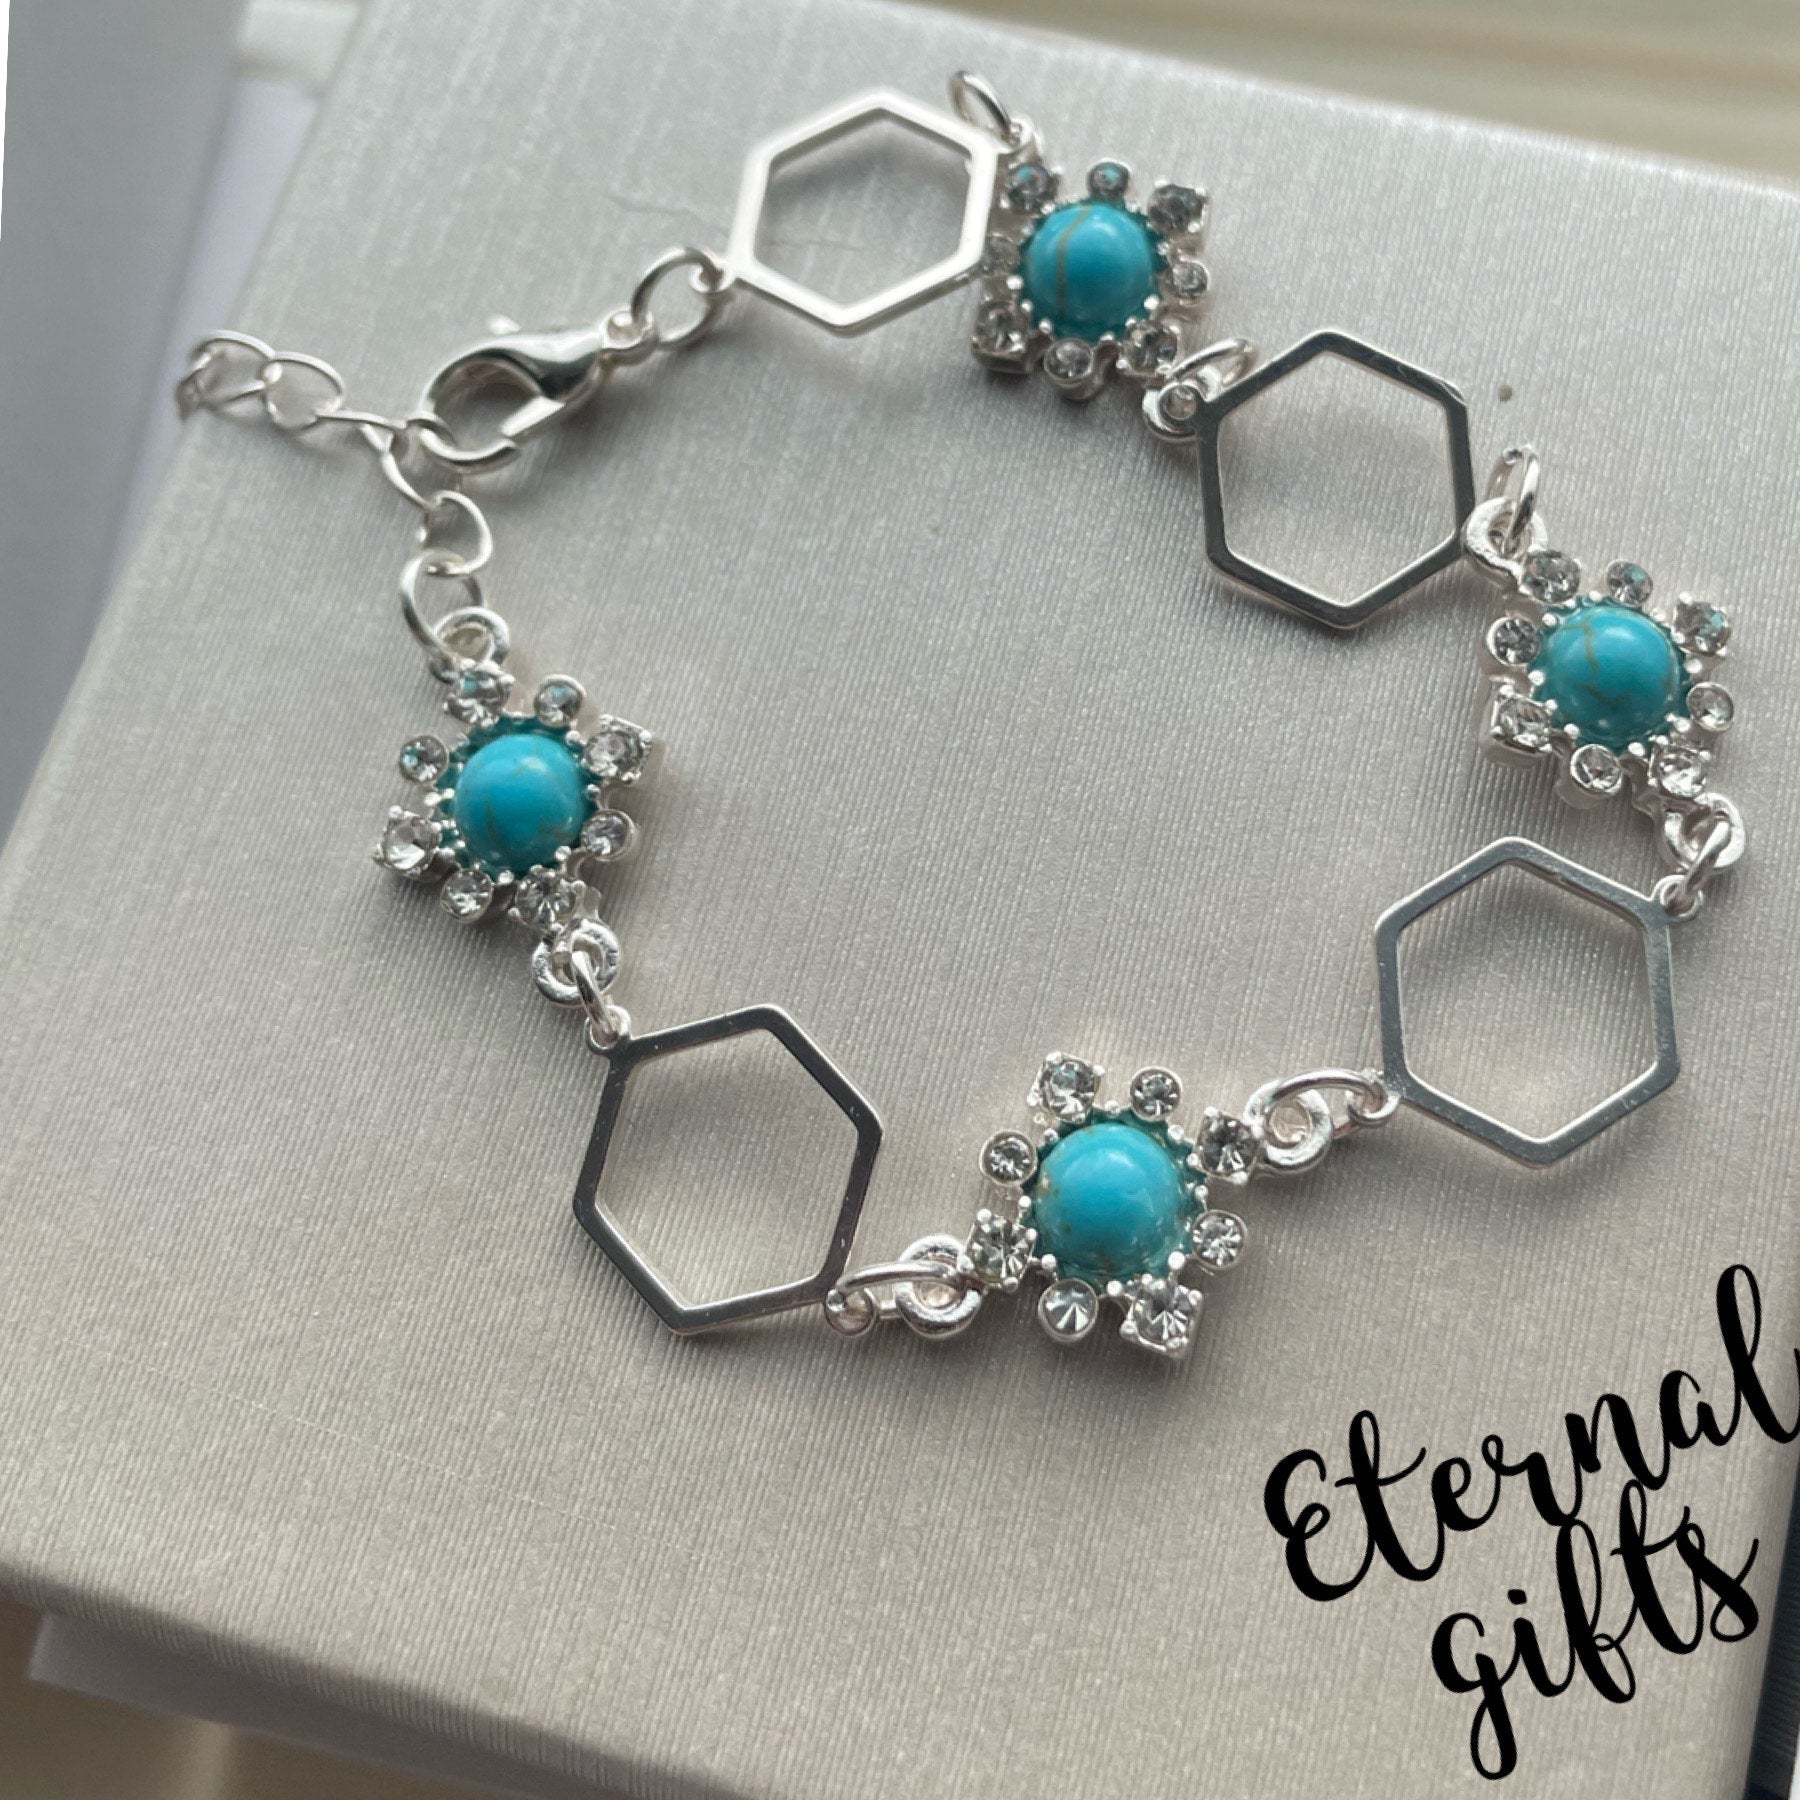 The Hexi Silver in Turquoise By Estela